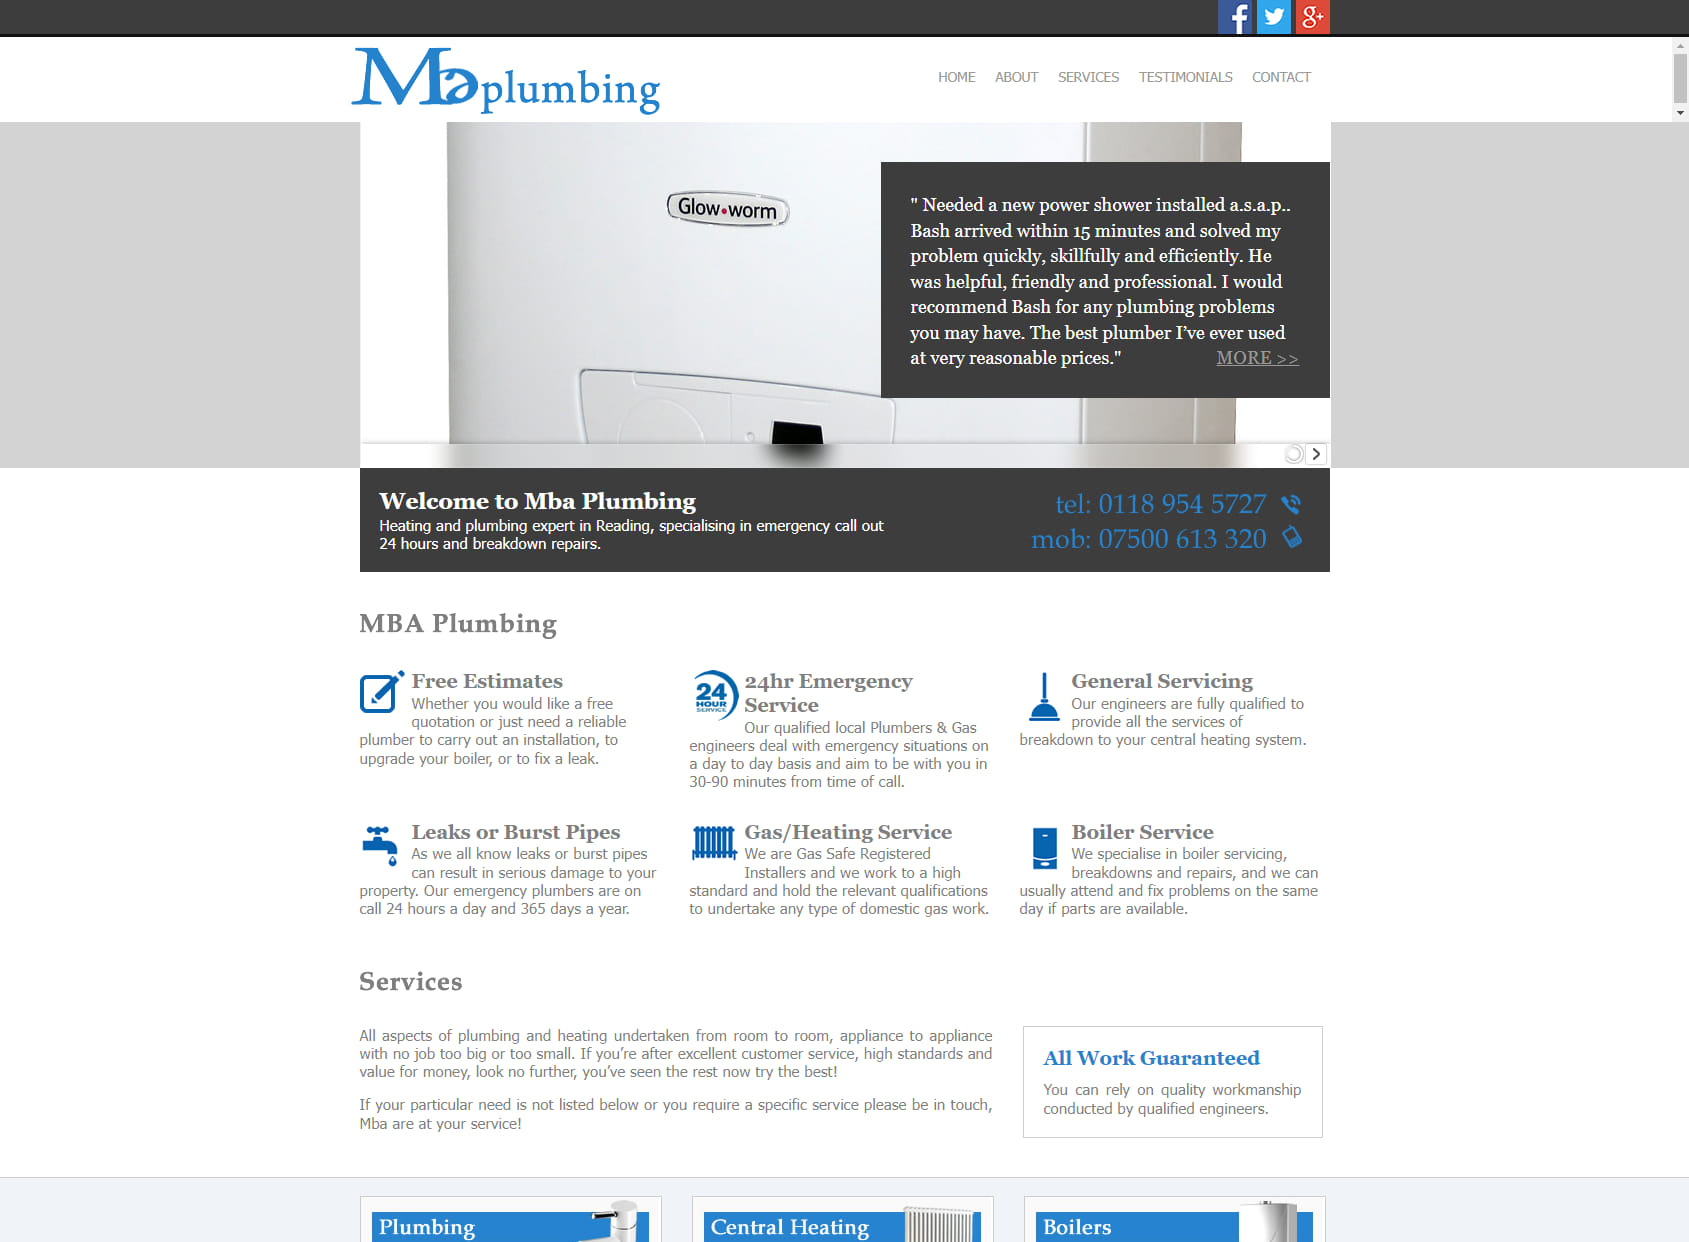 MBA Plumbing and Gas services